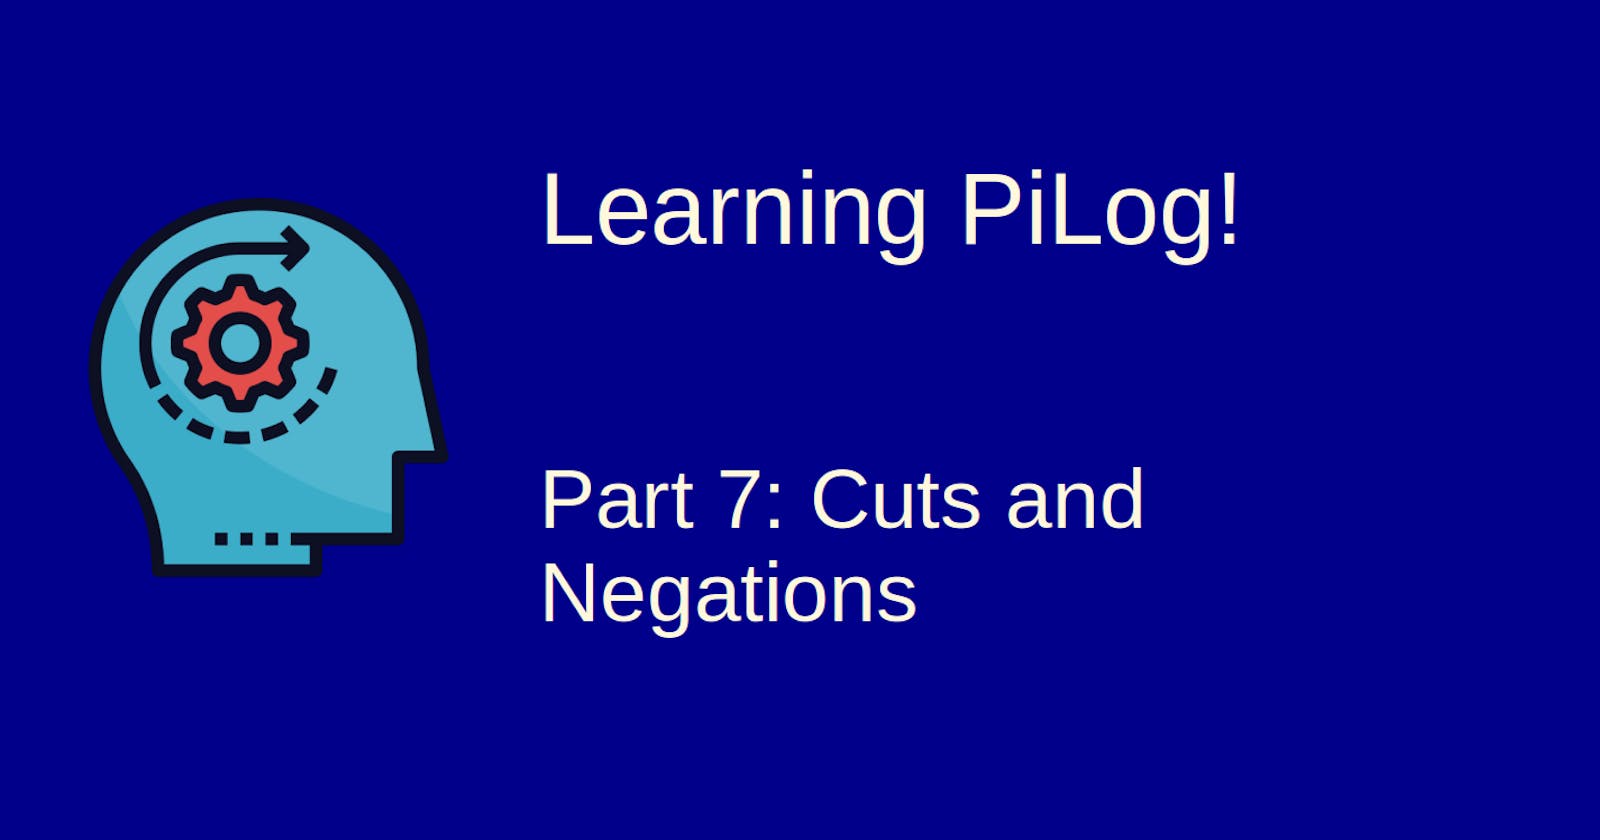 Learning Pilog - 7: Cuts and Negations